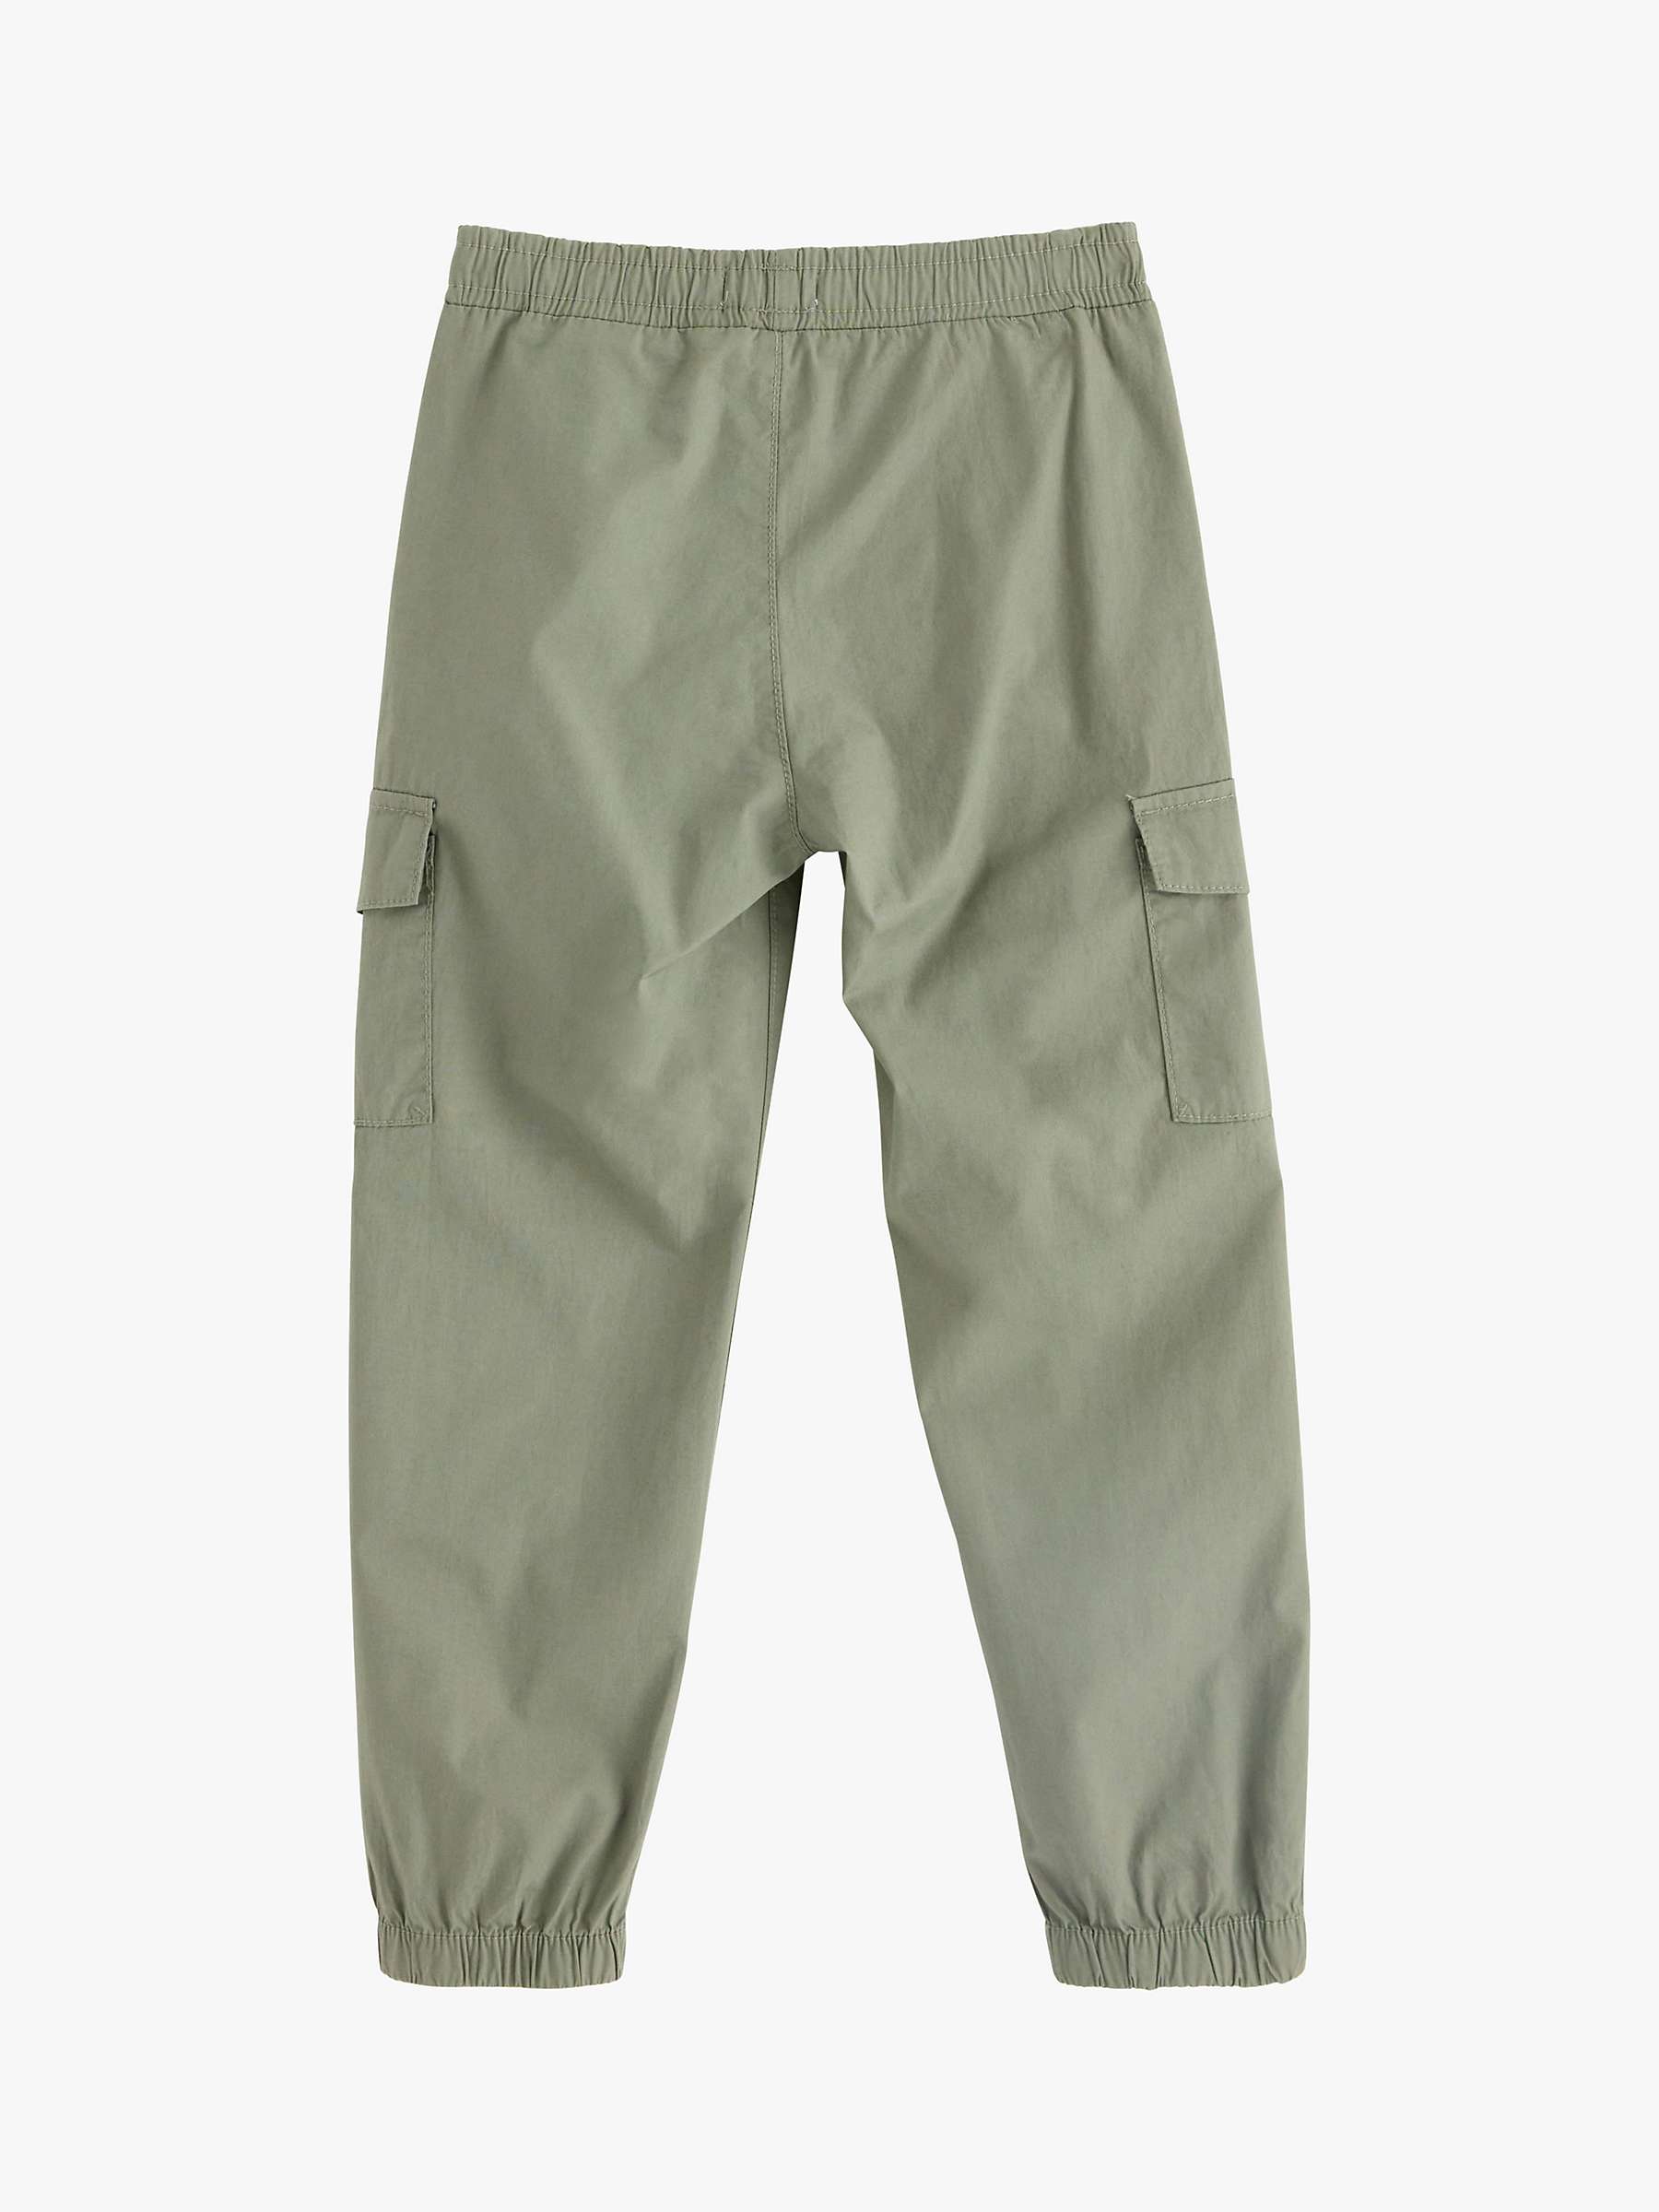 Buy Lindex Kids' Balloon Leg Cargo Trousers, Dusty Green Online at johnlewis.com